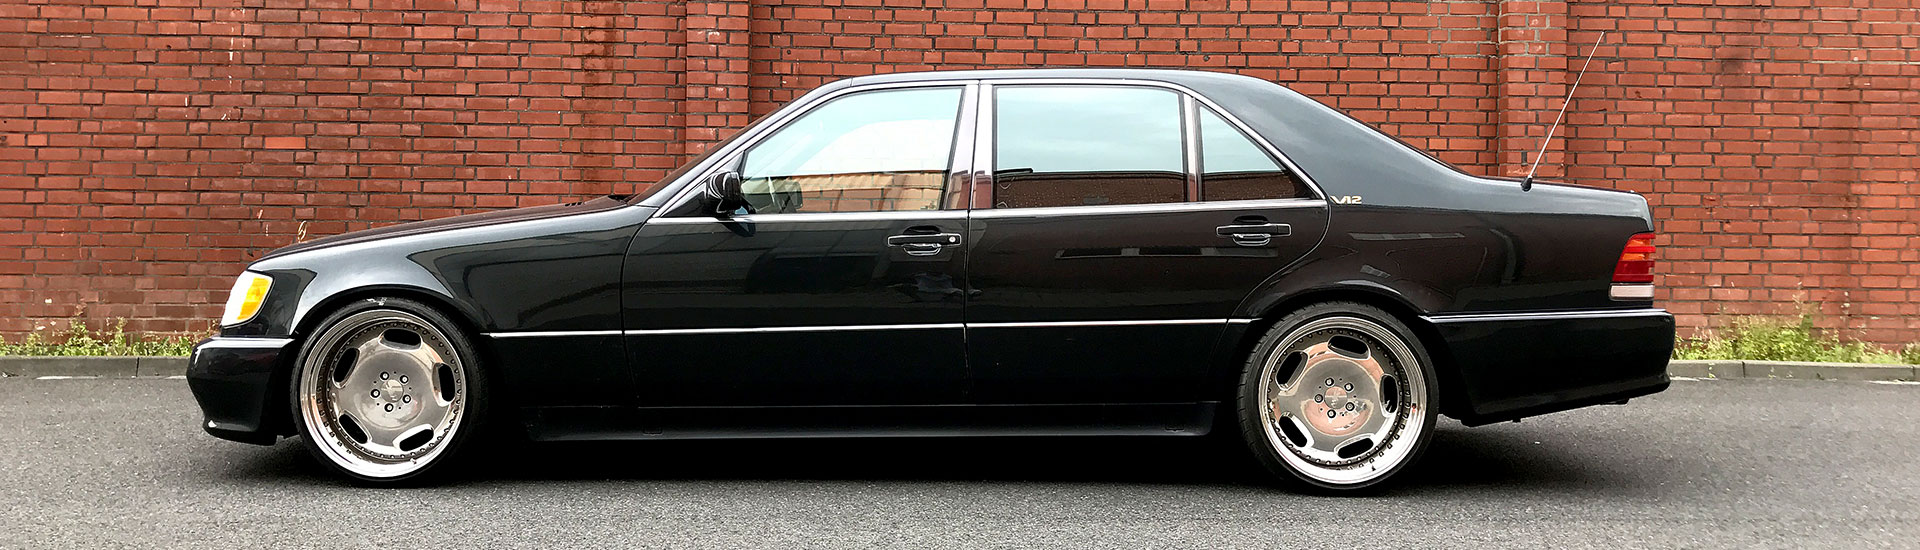 Mec Design Tuning And Modification For The Mercedes W140